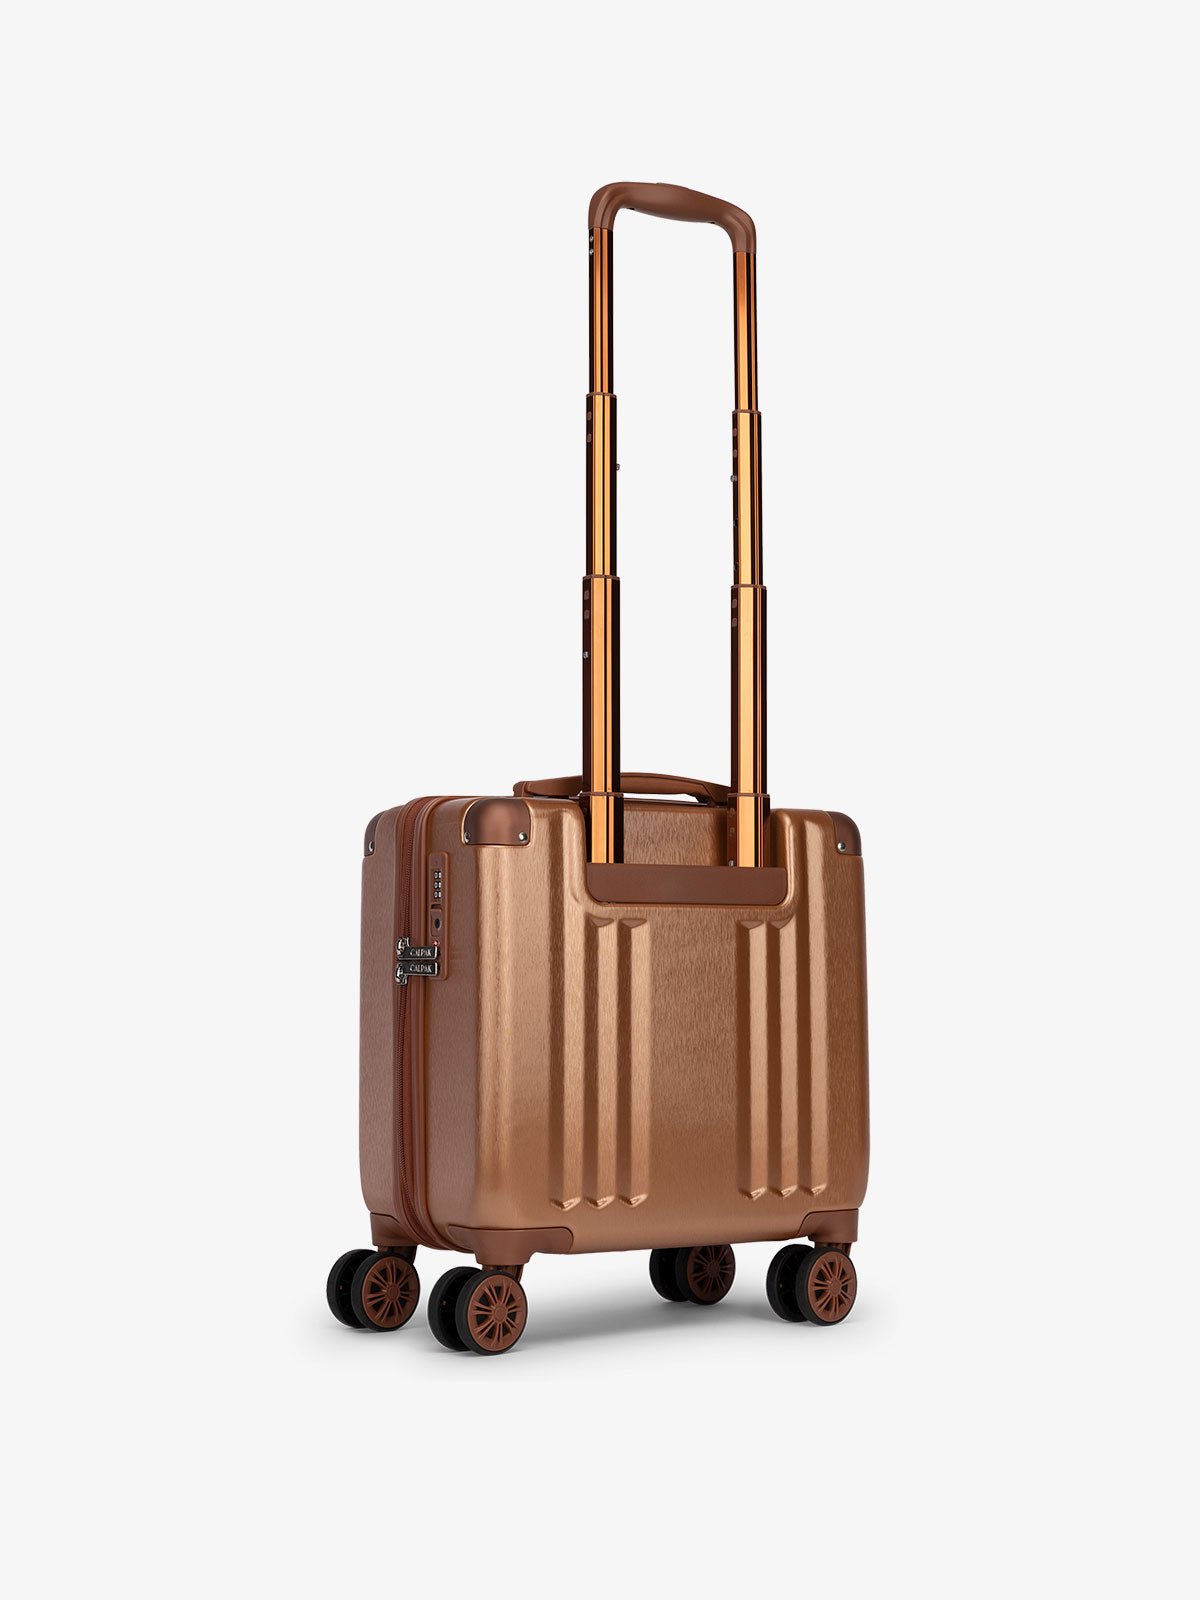 CALPAK Ambeur small carry-on suitcase with top handle in copper